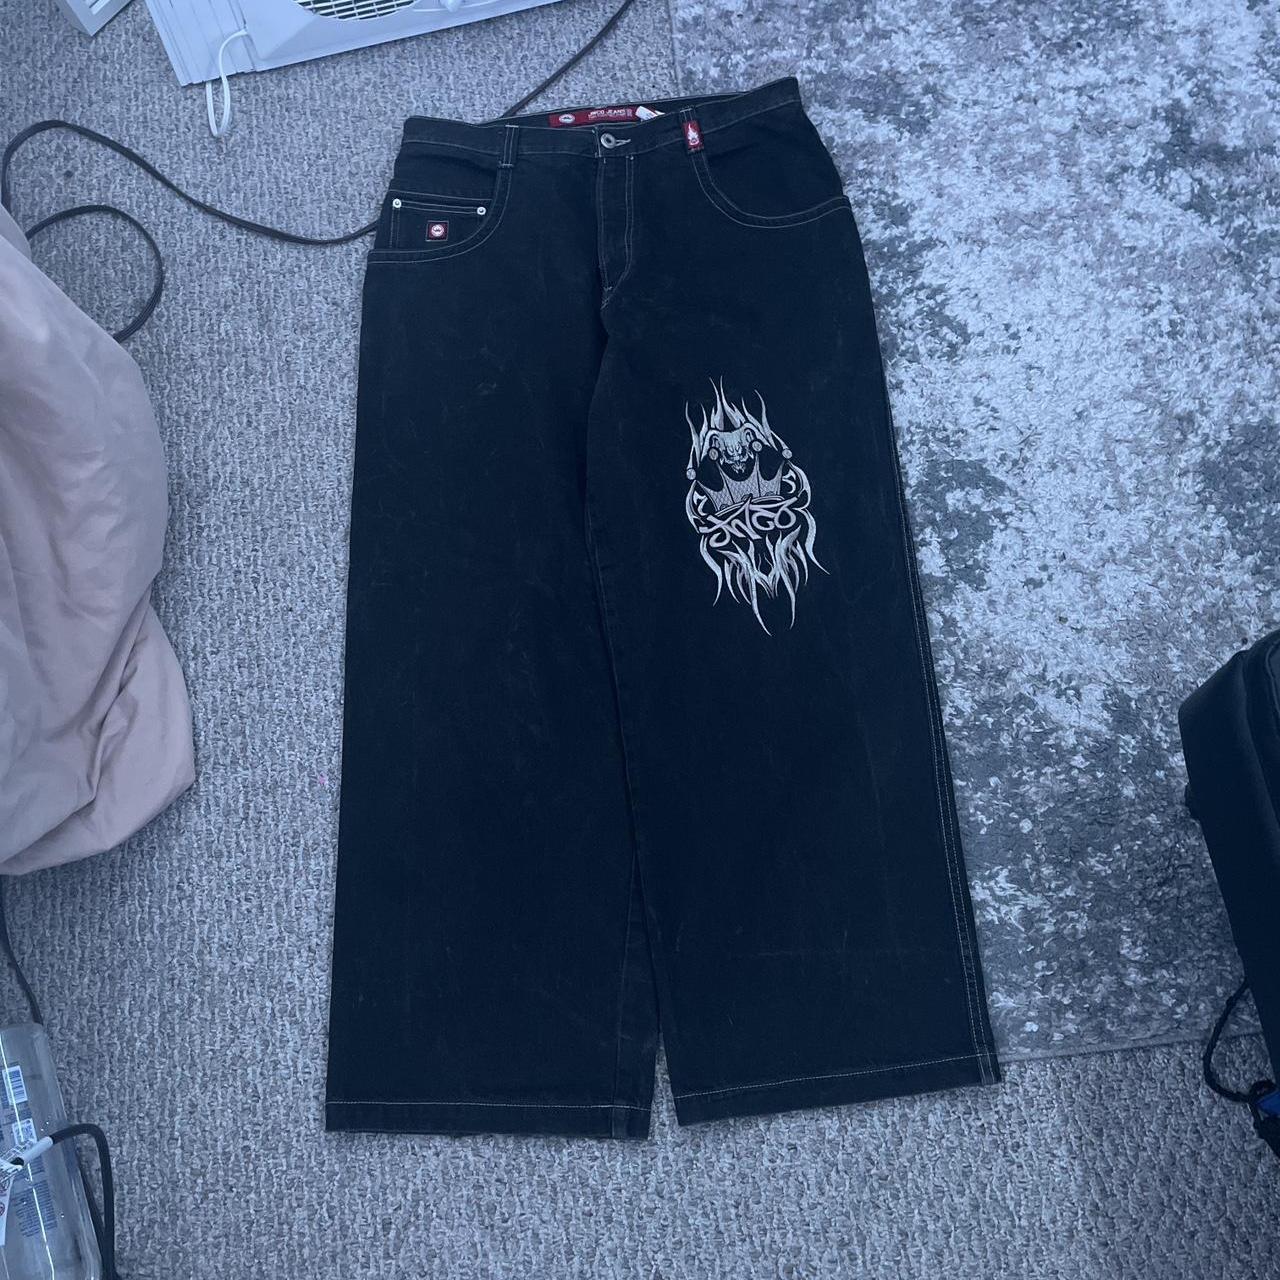 jnco tribals(not real price) condition 9/10 some... - Depop